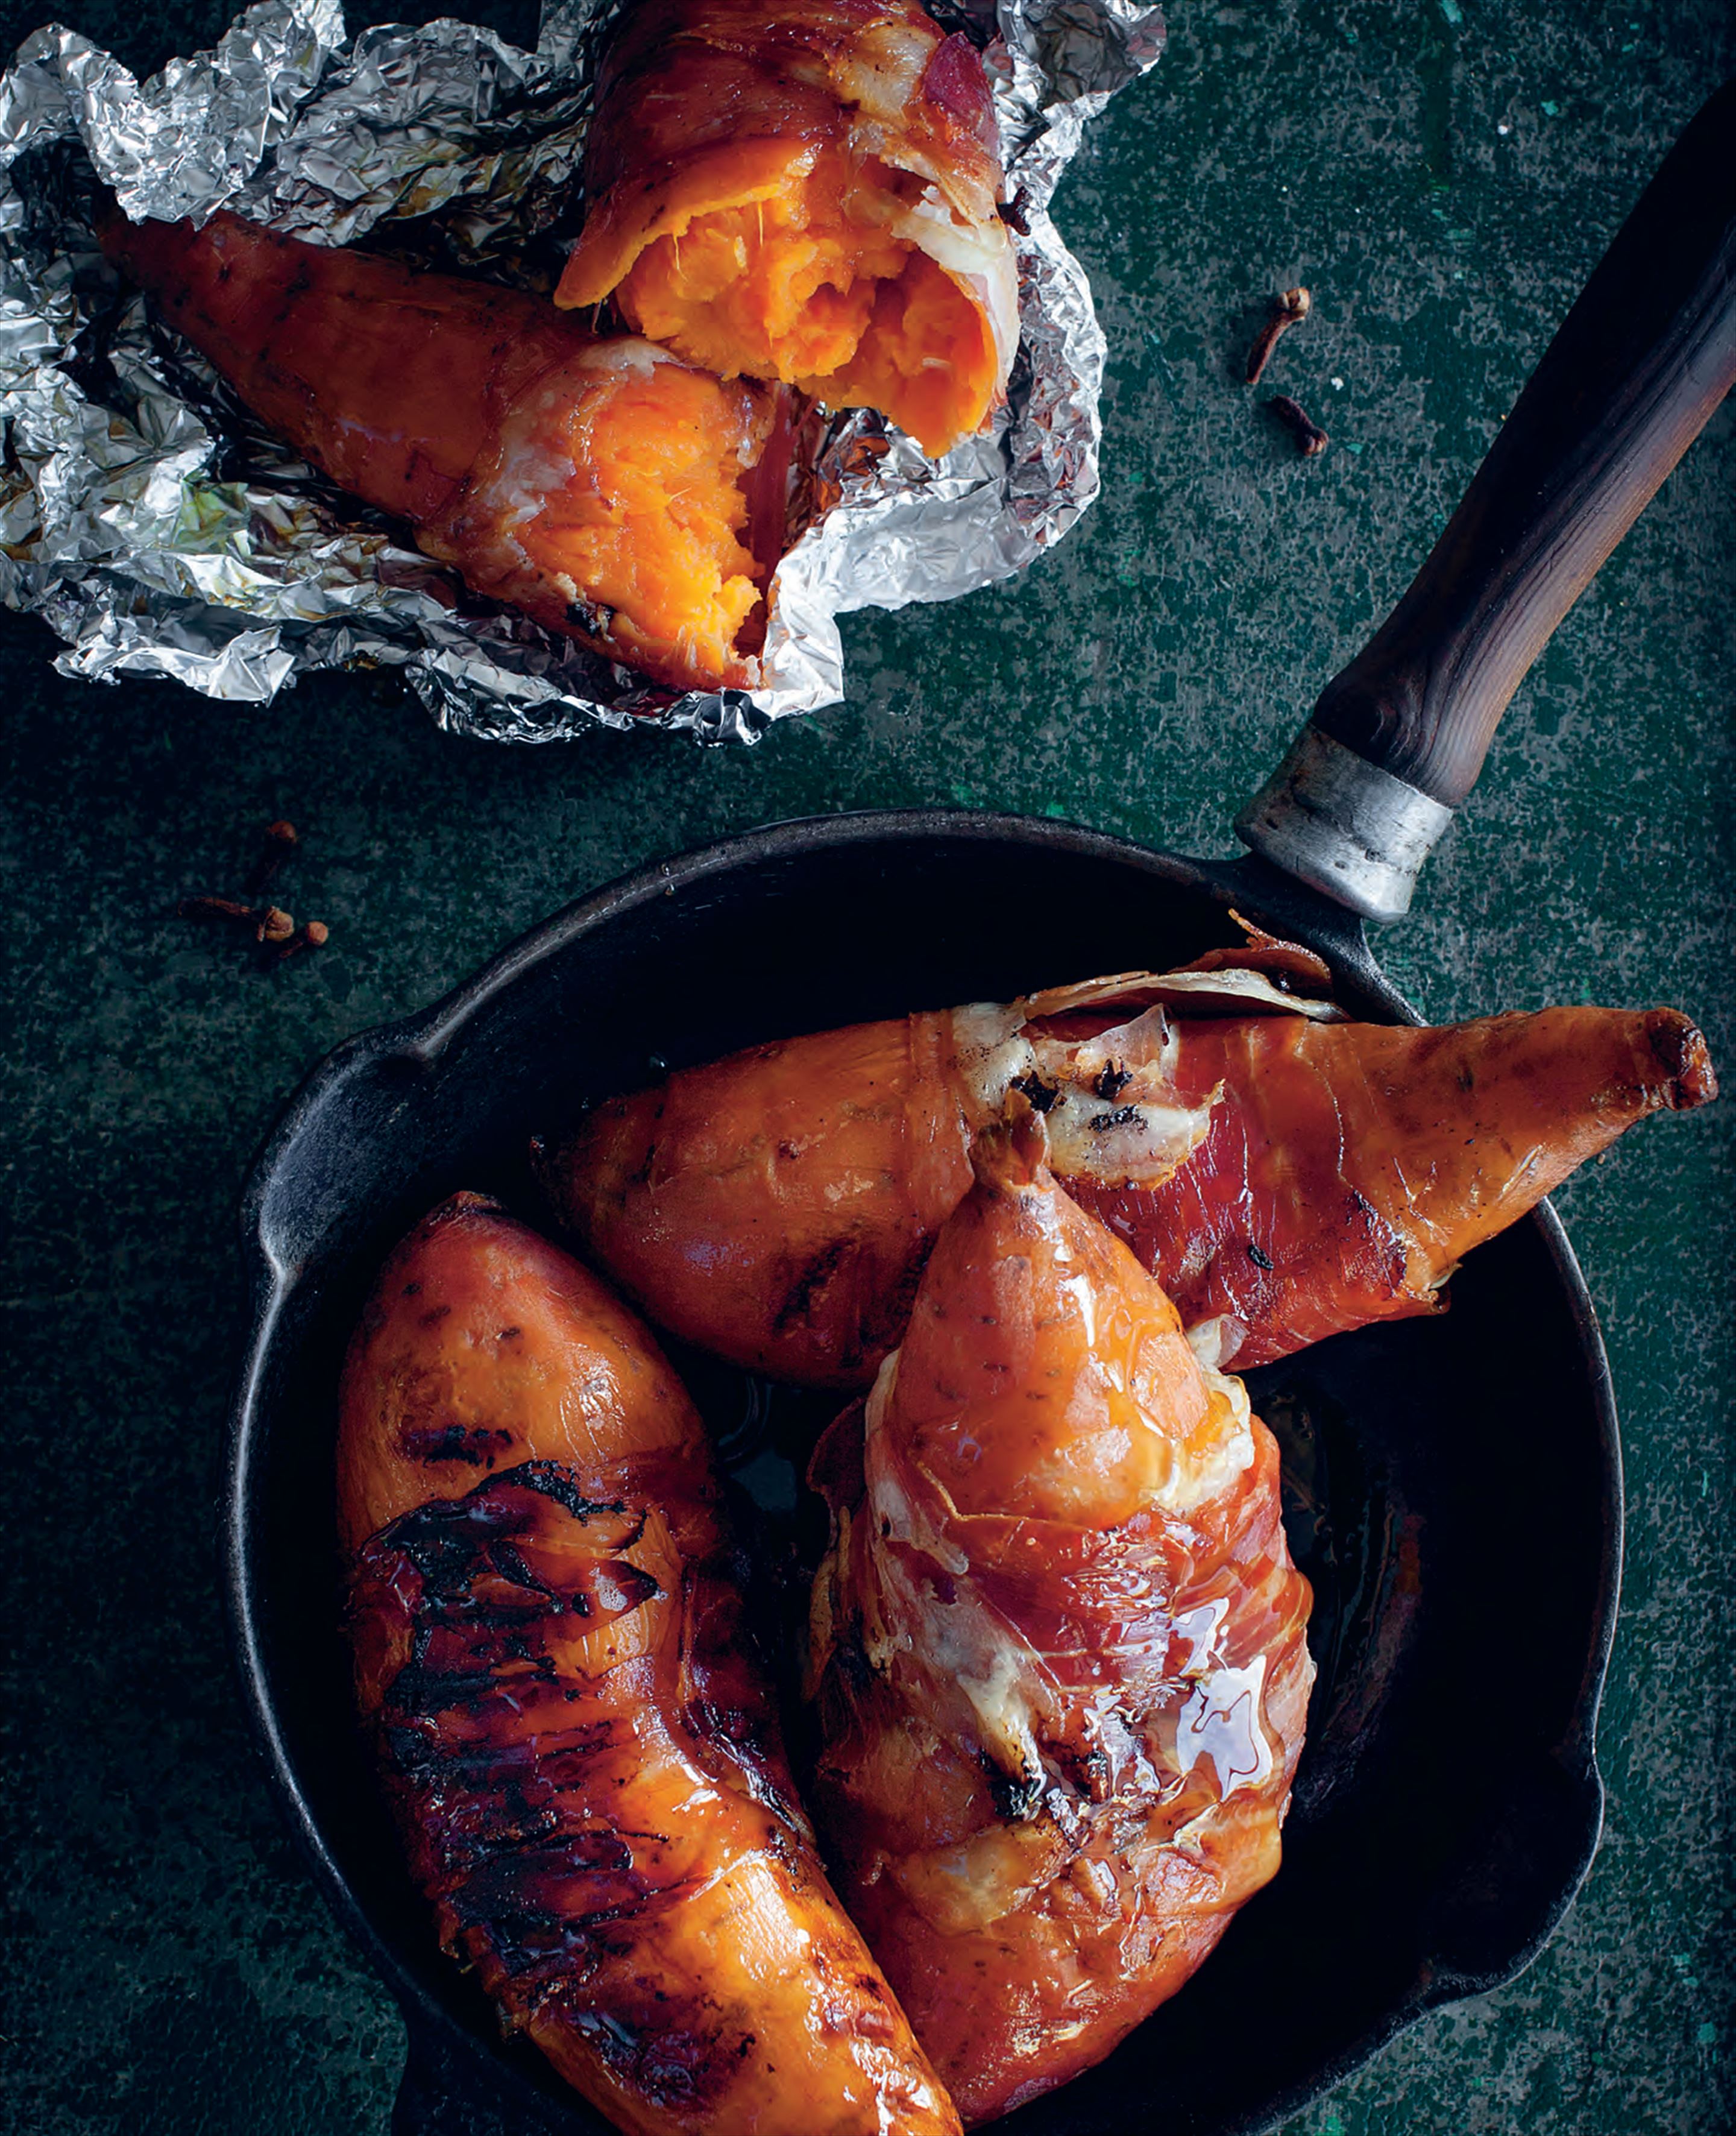 Baked sweet potatoes with speck, cloves and maple syrup